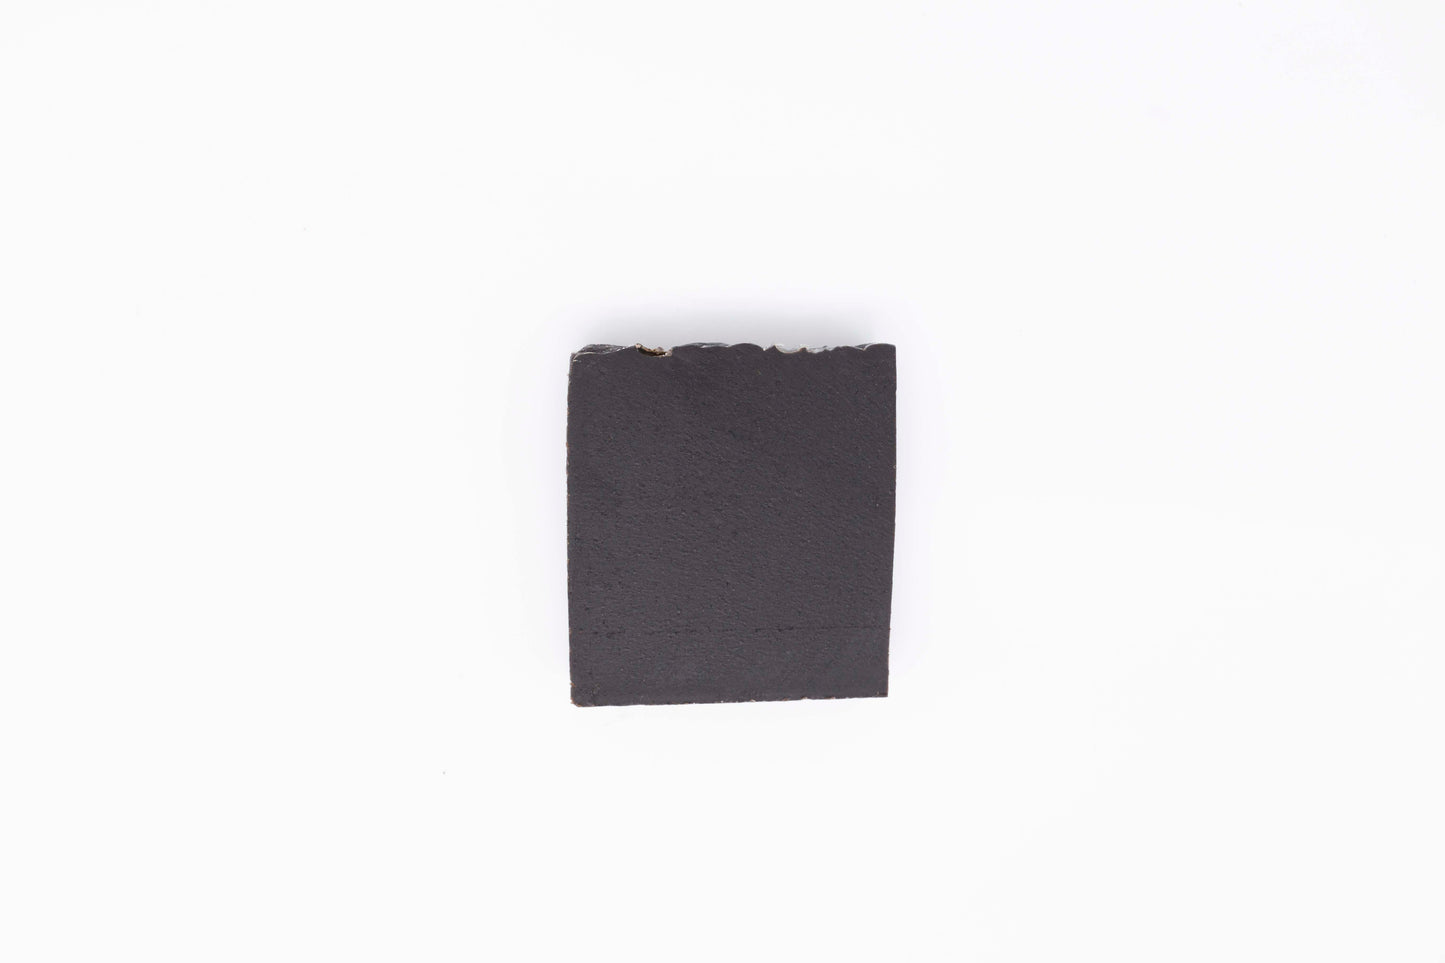 A charcoal black Midnight Anise soap bar sits on a clean white backdrop